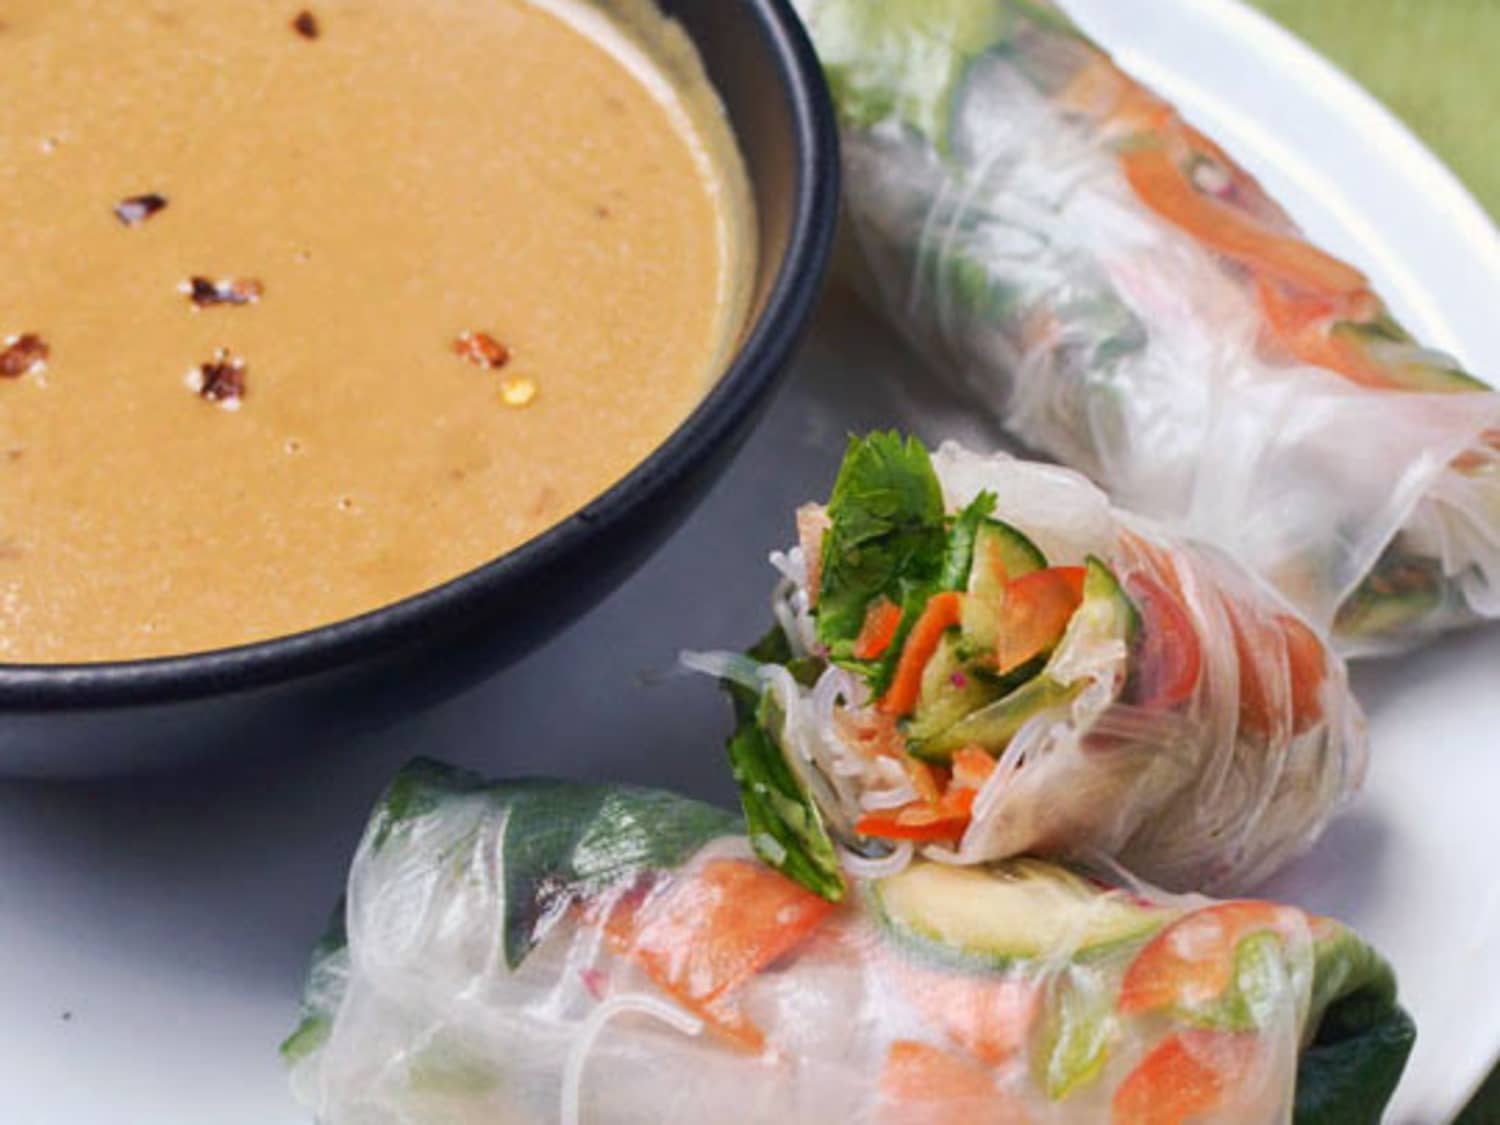 How To Make Vietnamese Spring Rolls Summer Rolls with Spicy Peanut Sauce